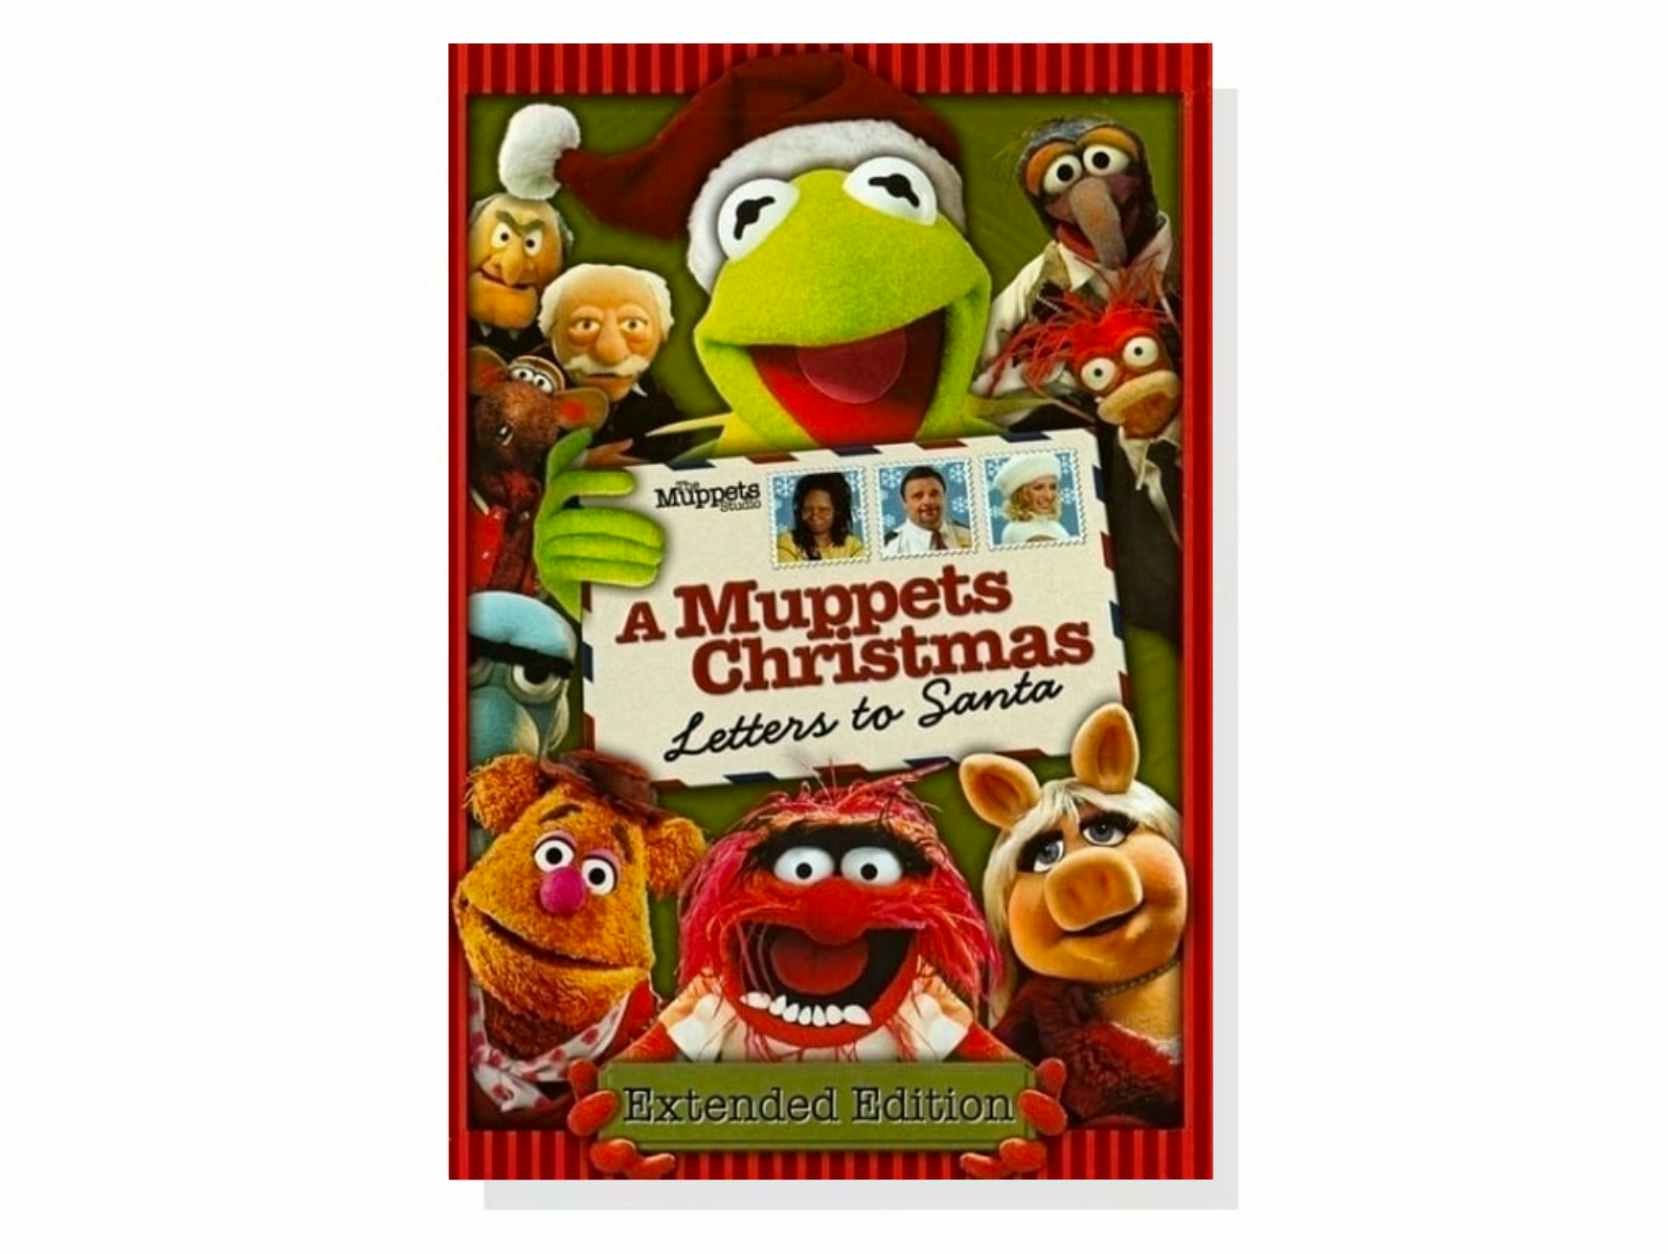 Movie poster for A Muppets Christmas, one of the best Christmas movies on Disney Plus.